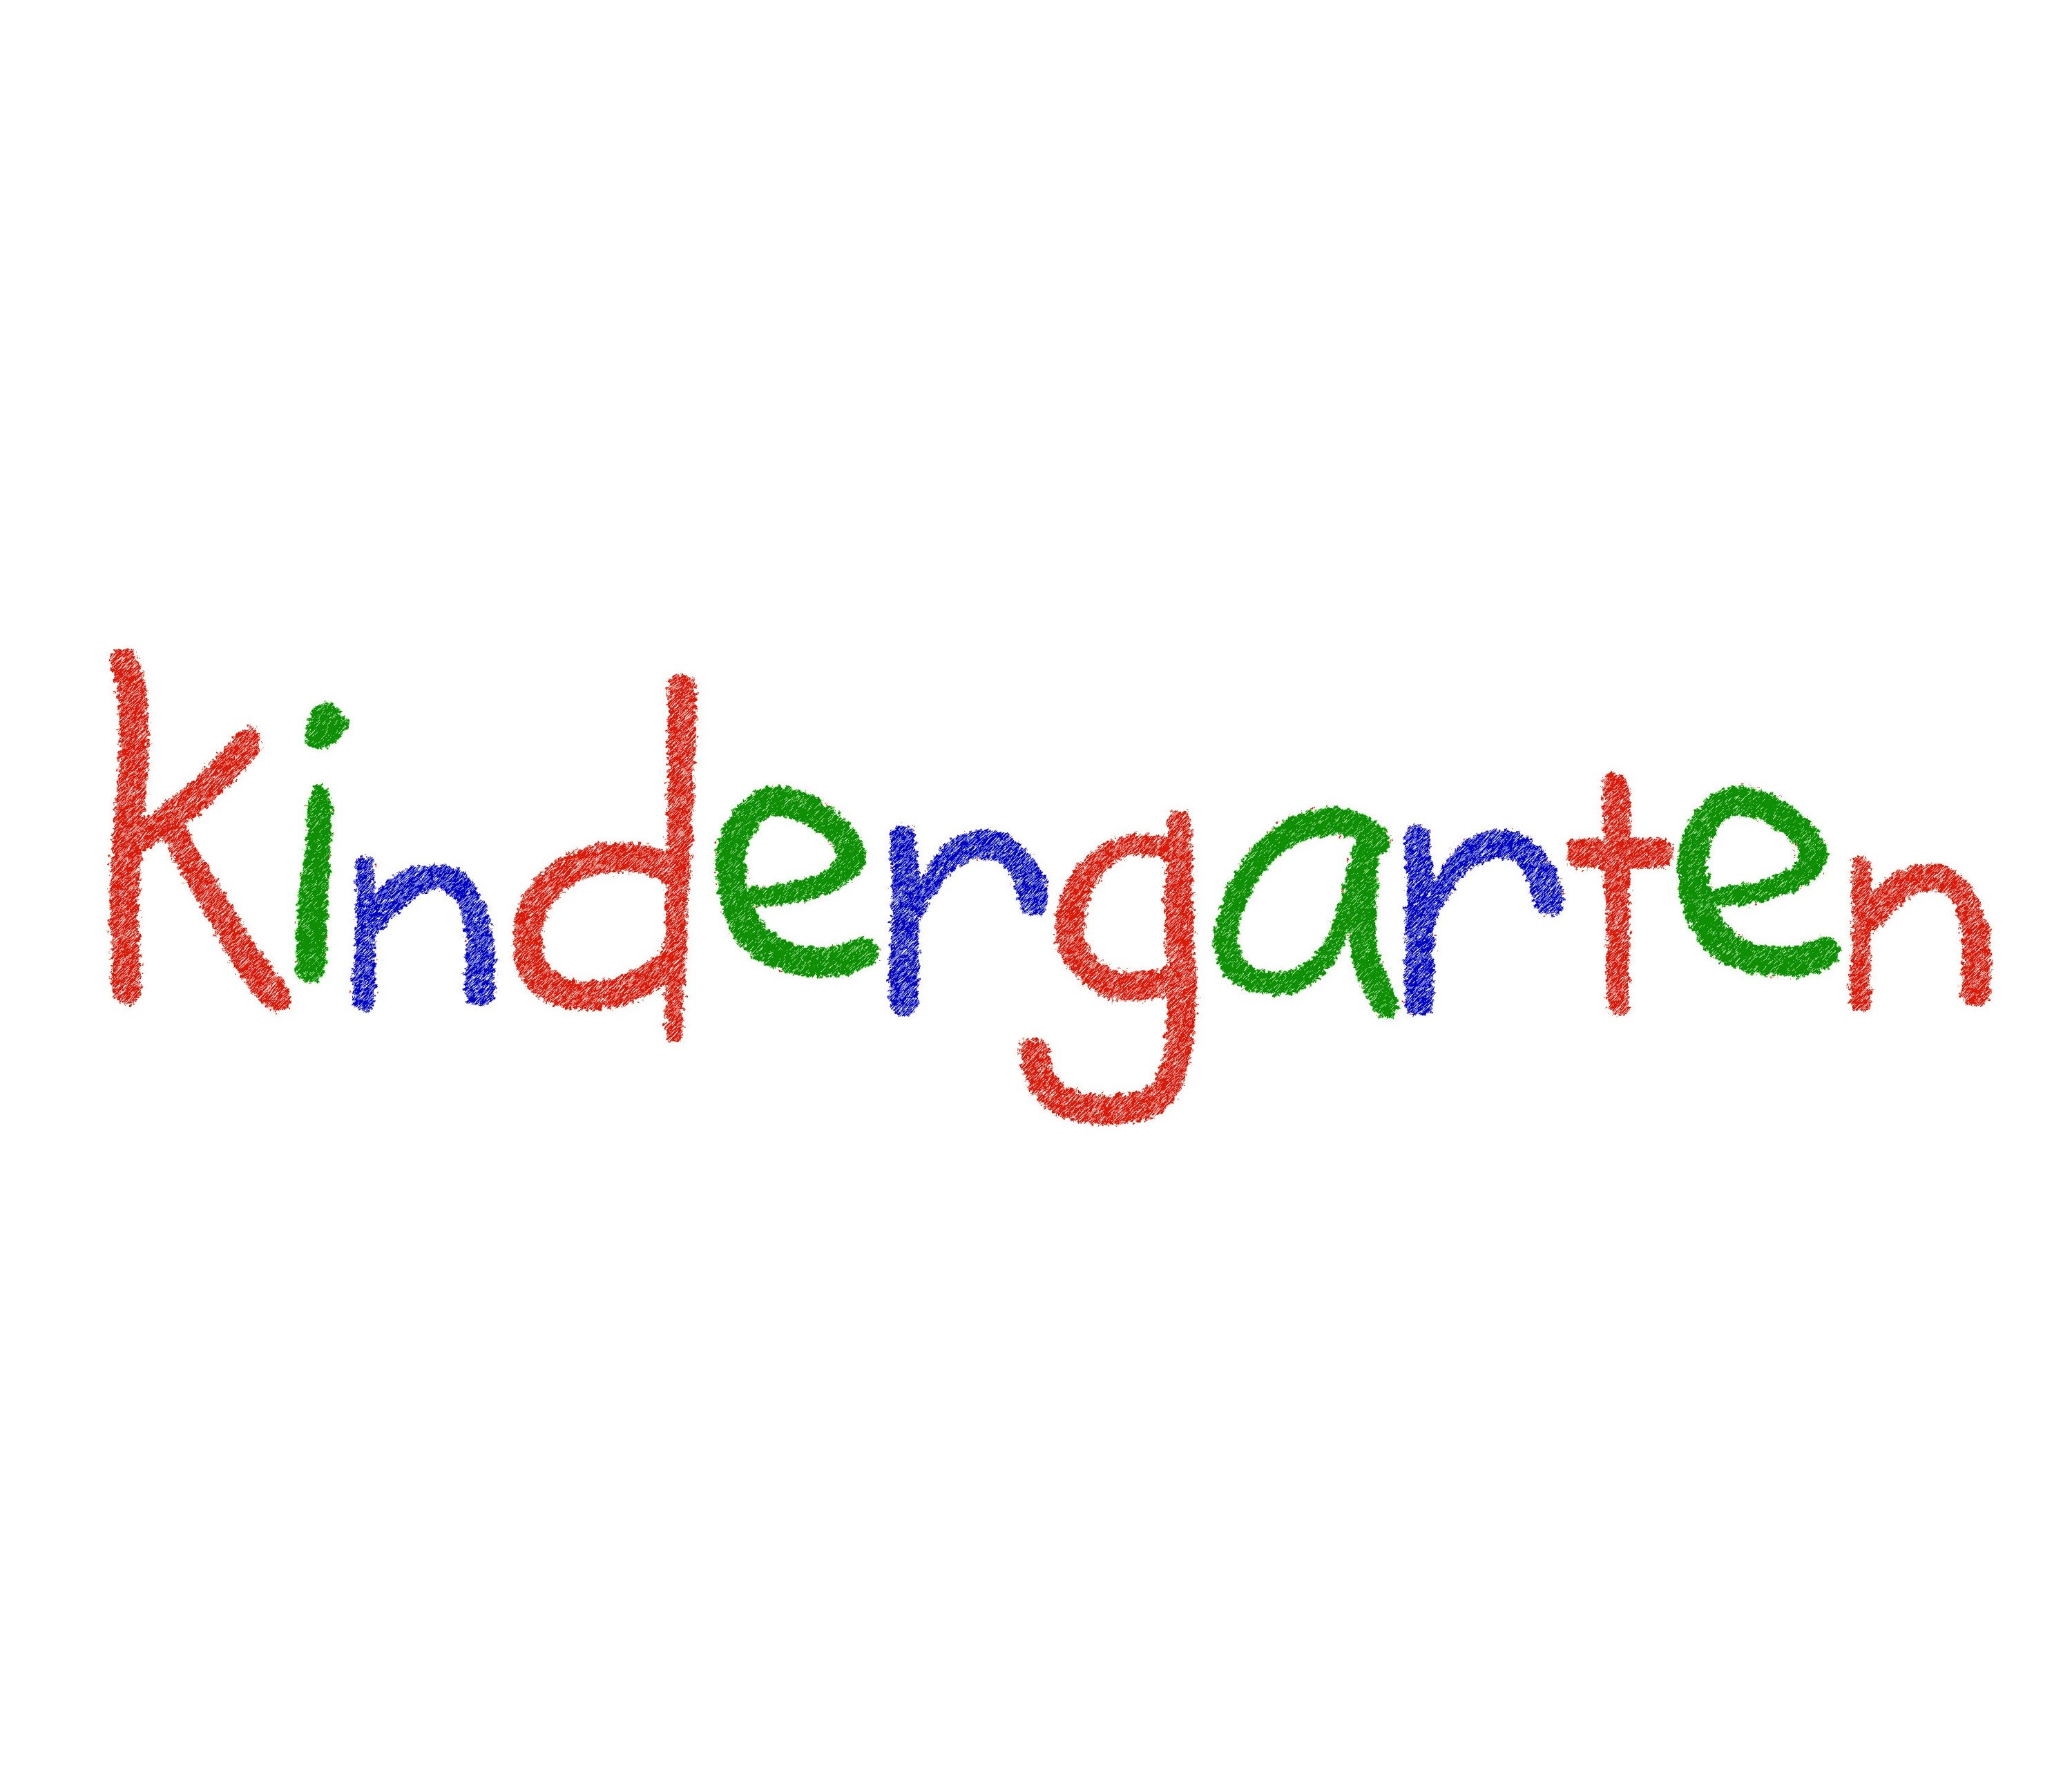 Image: The word Kindergarten, written in bright colours and a child-like script, over a white background